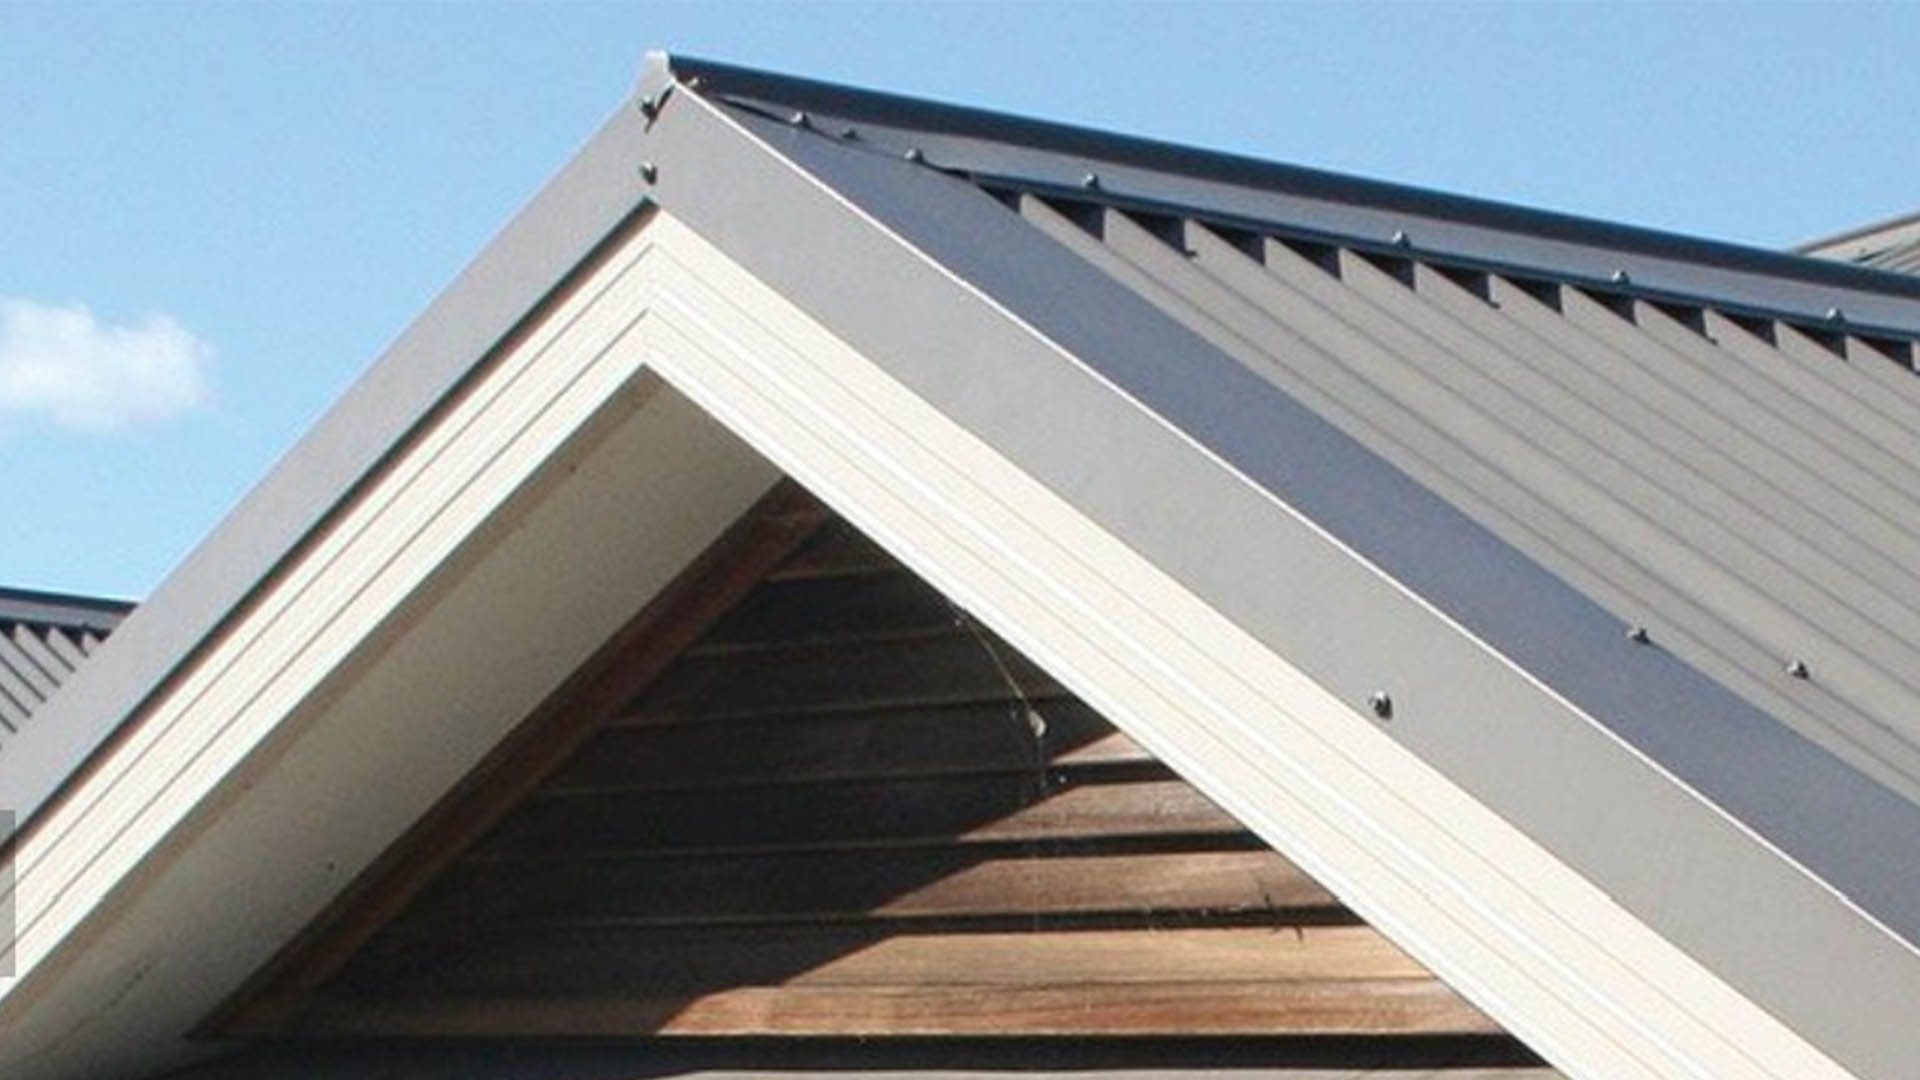 COLORBOND corrugated steel roofing